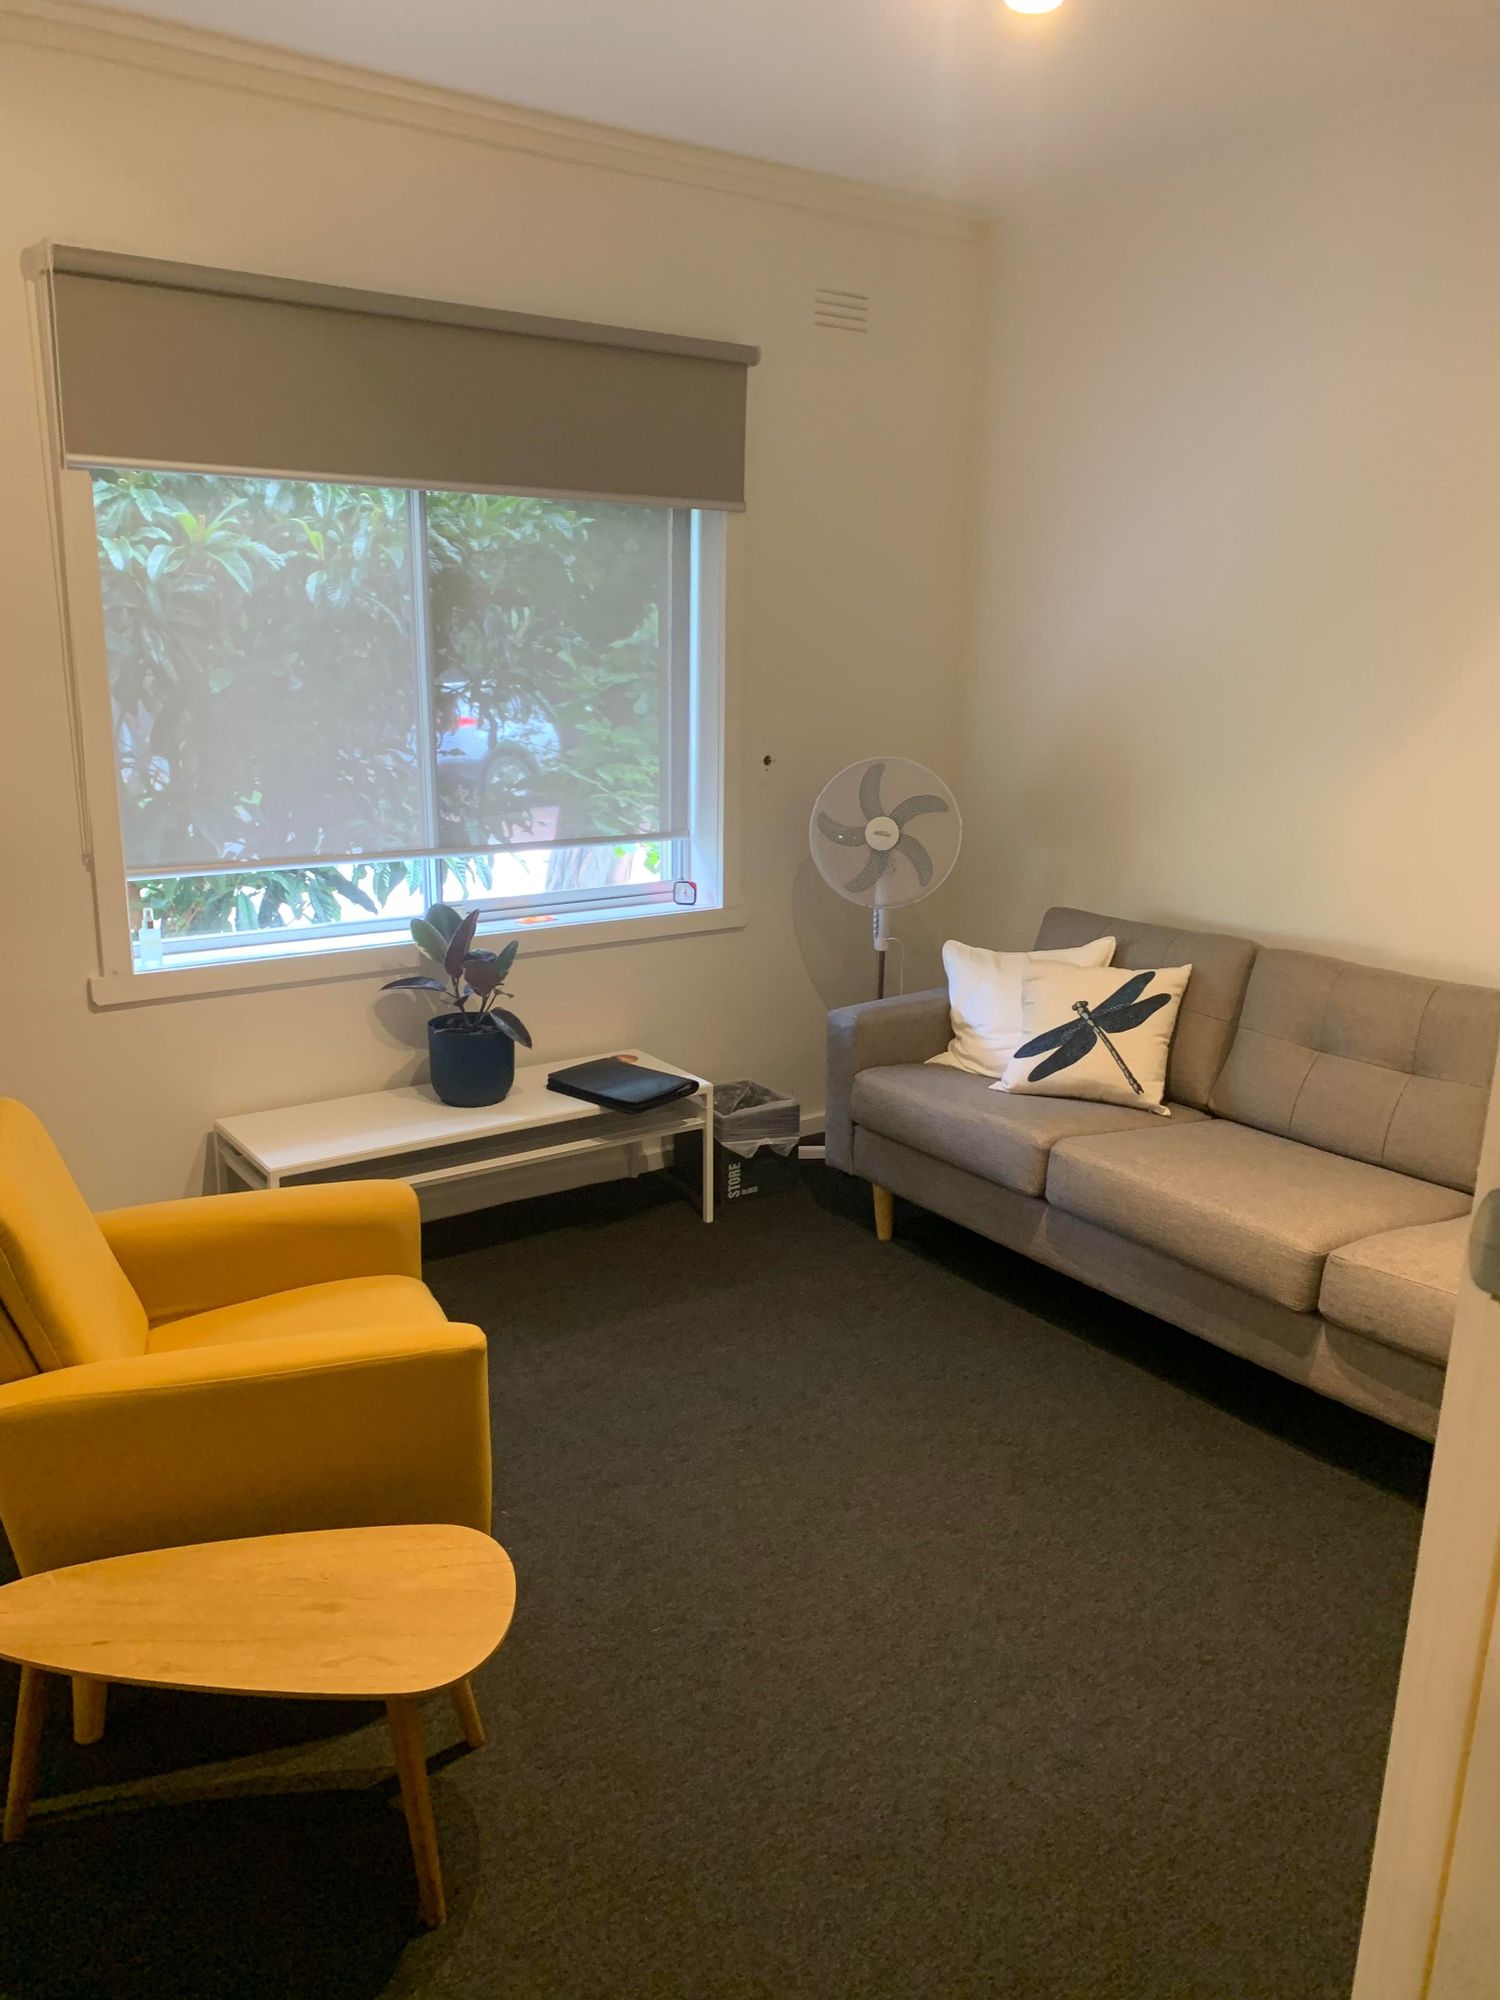 Gallery Photo of Discrete and comfortable consulting room in the heart of West Footscray